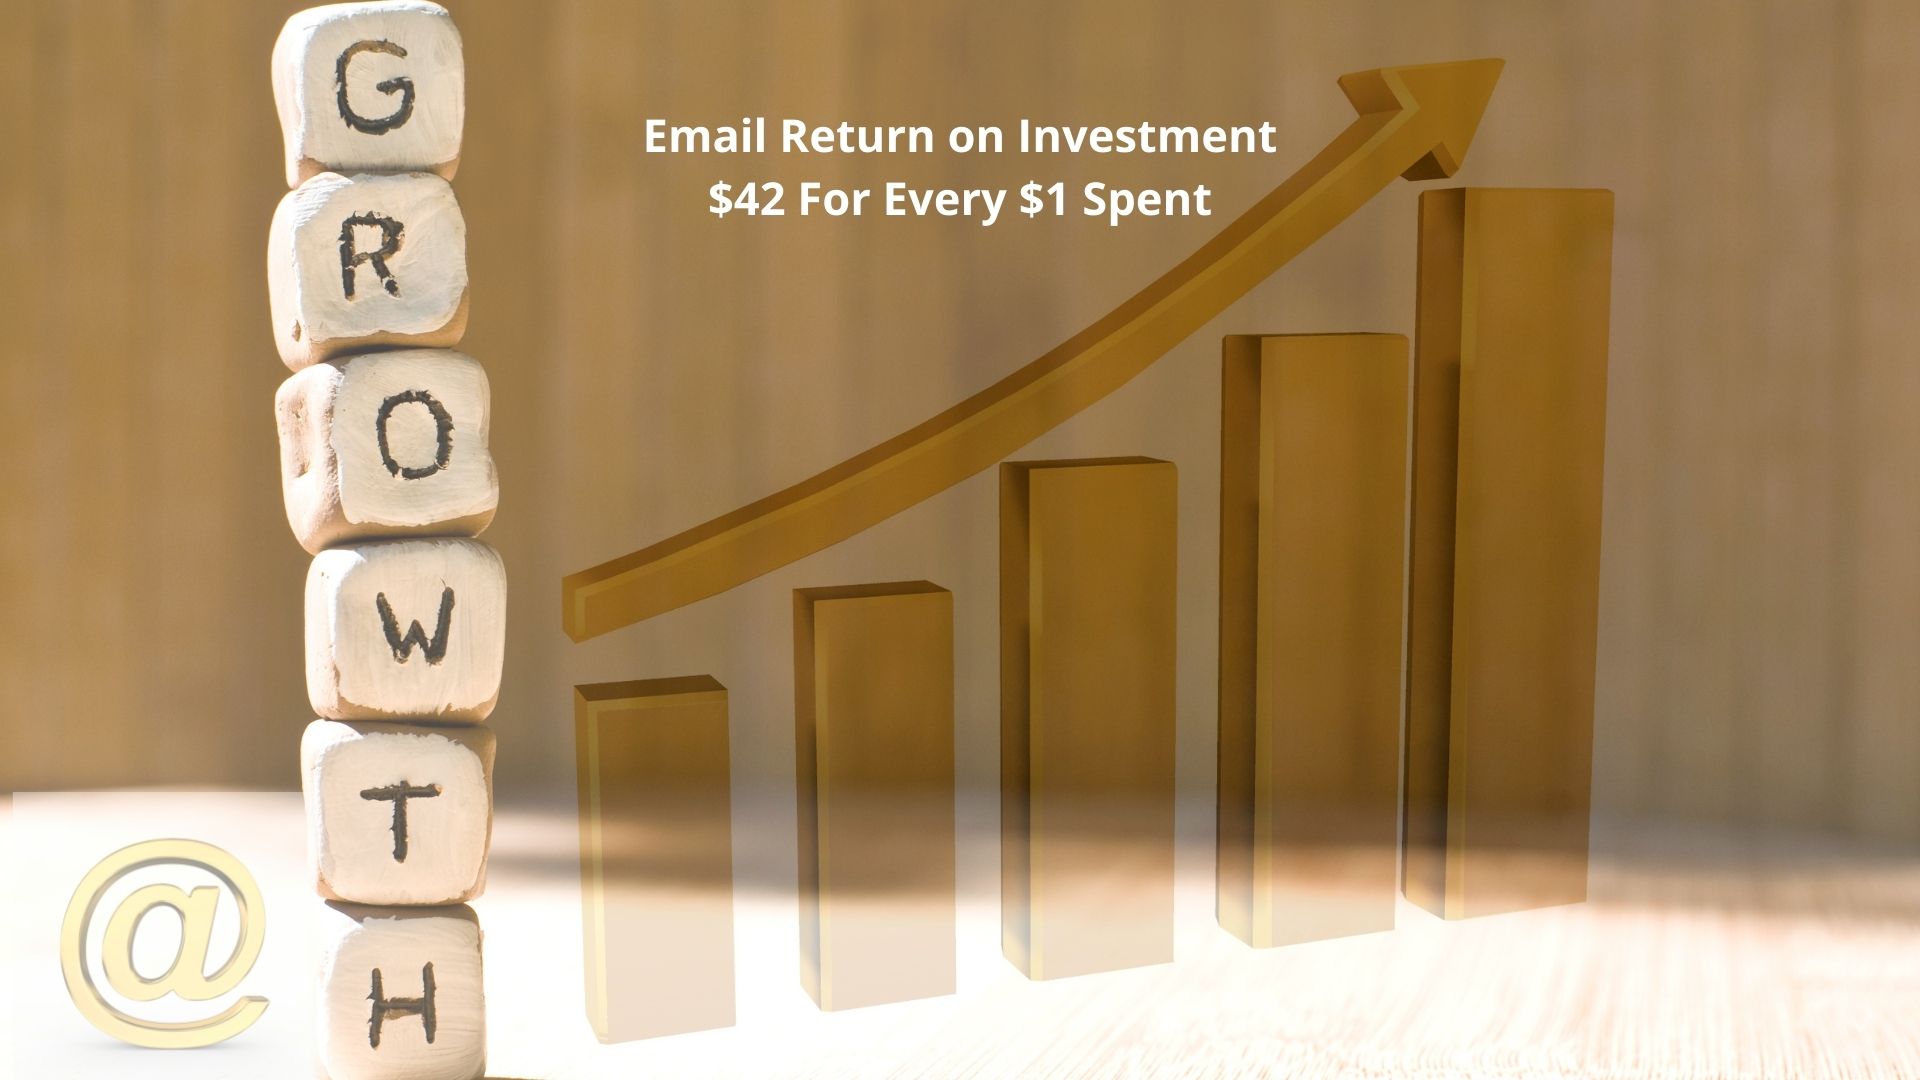 Email Marketing Graph showing return on investment of 4200%